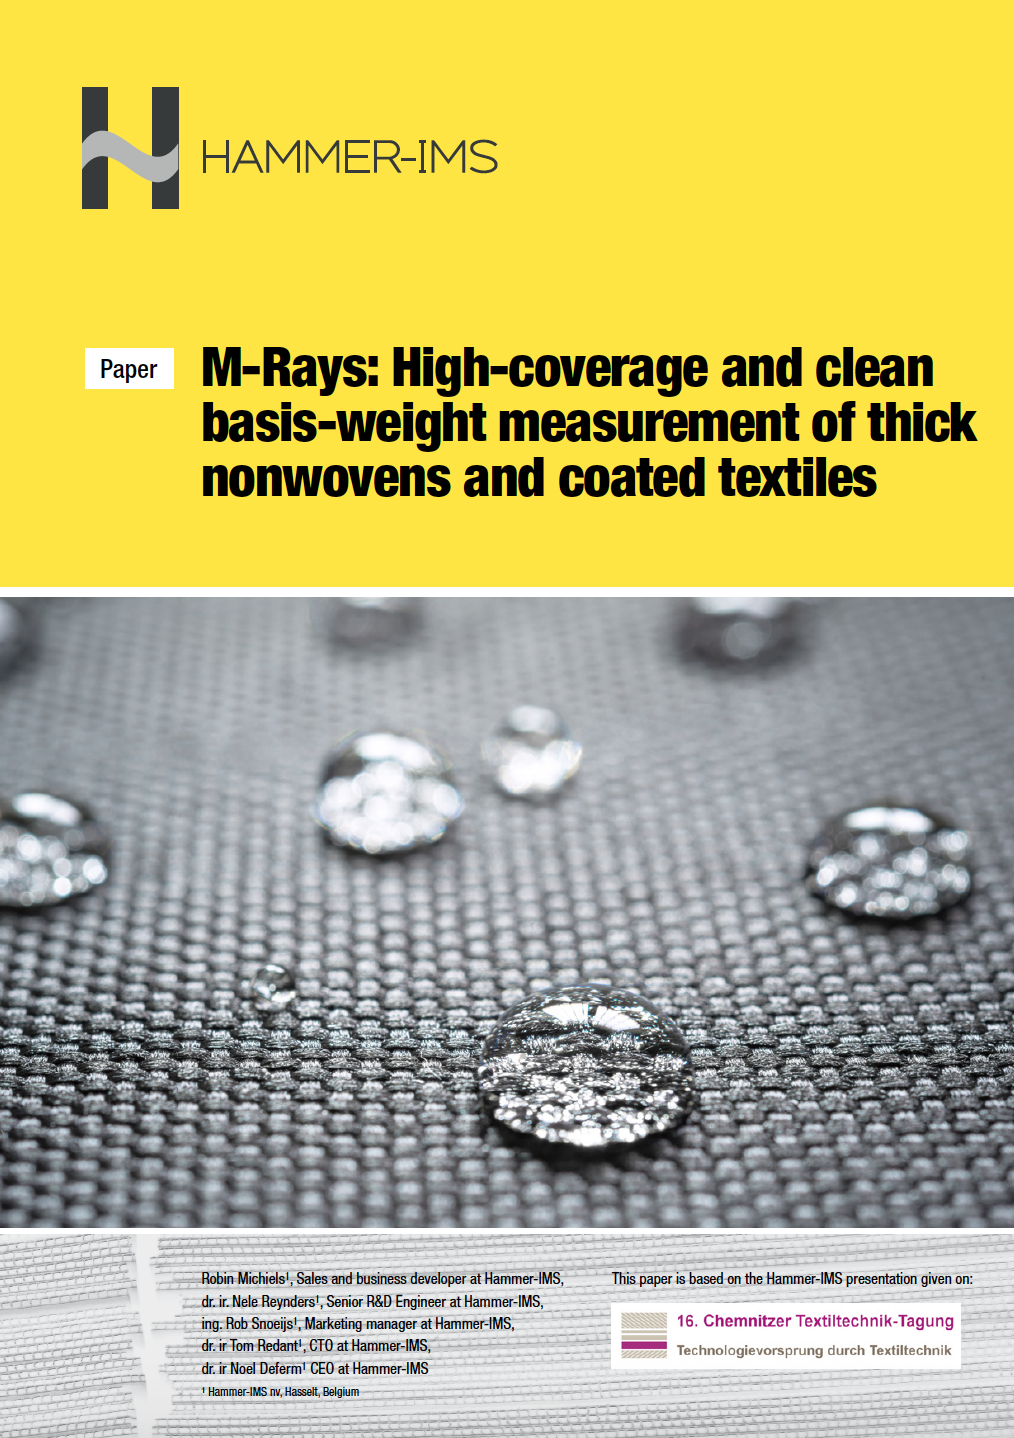 Technical paper: M-Rays – High-coverage and clean basis-weight measurement of thick nonwovens and coated textiles